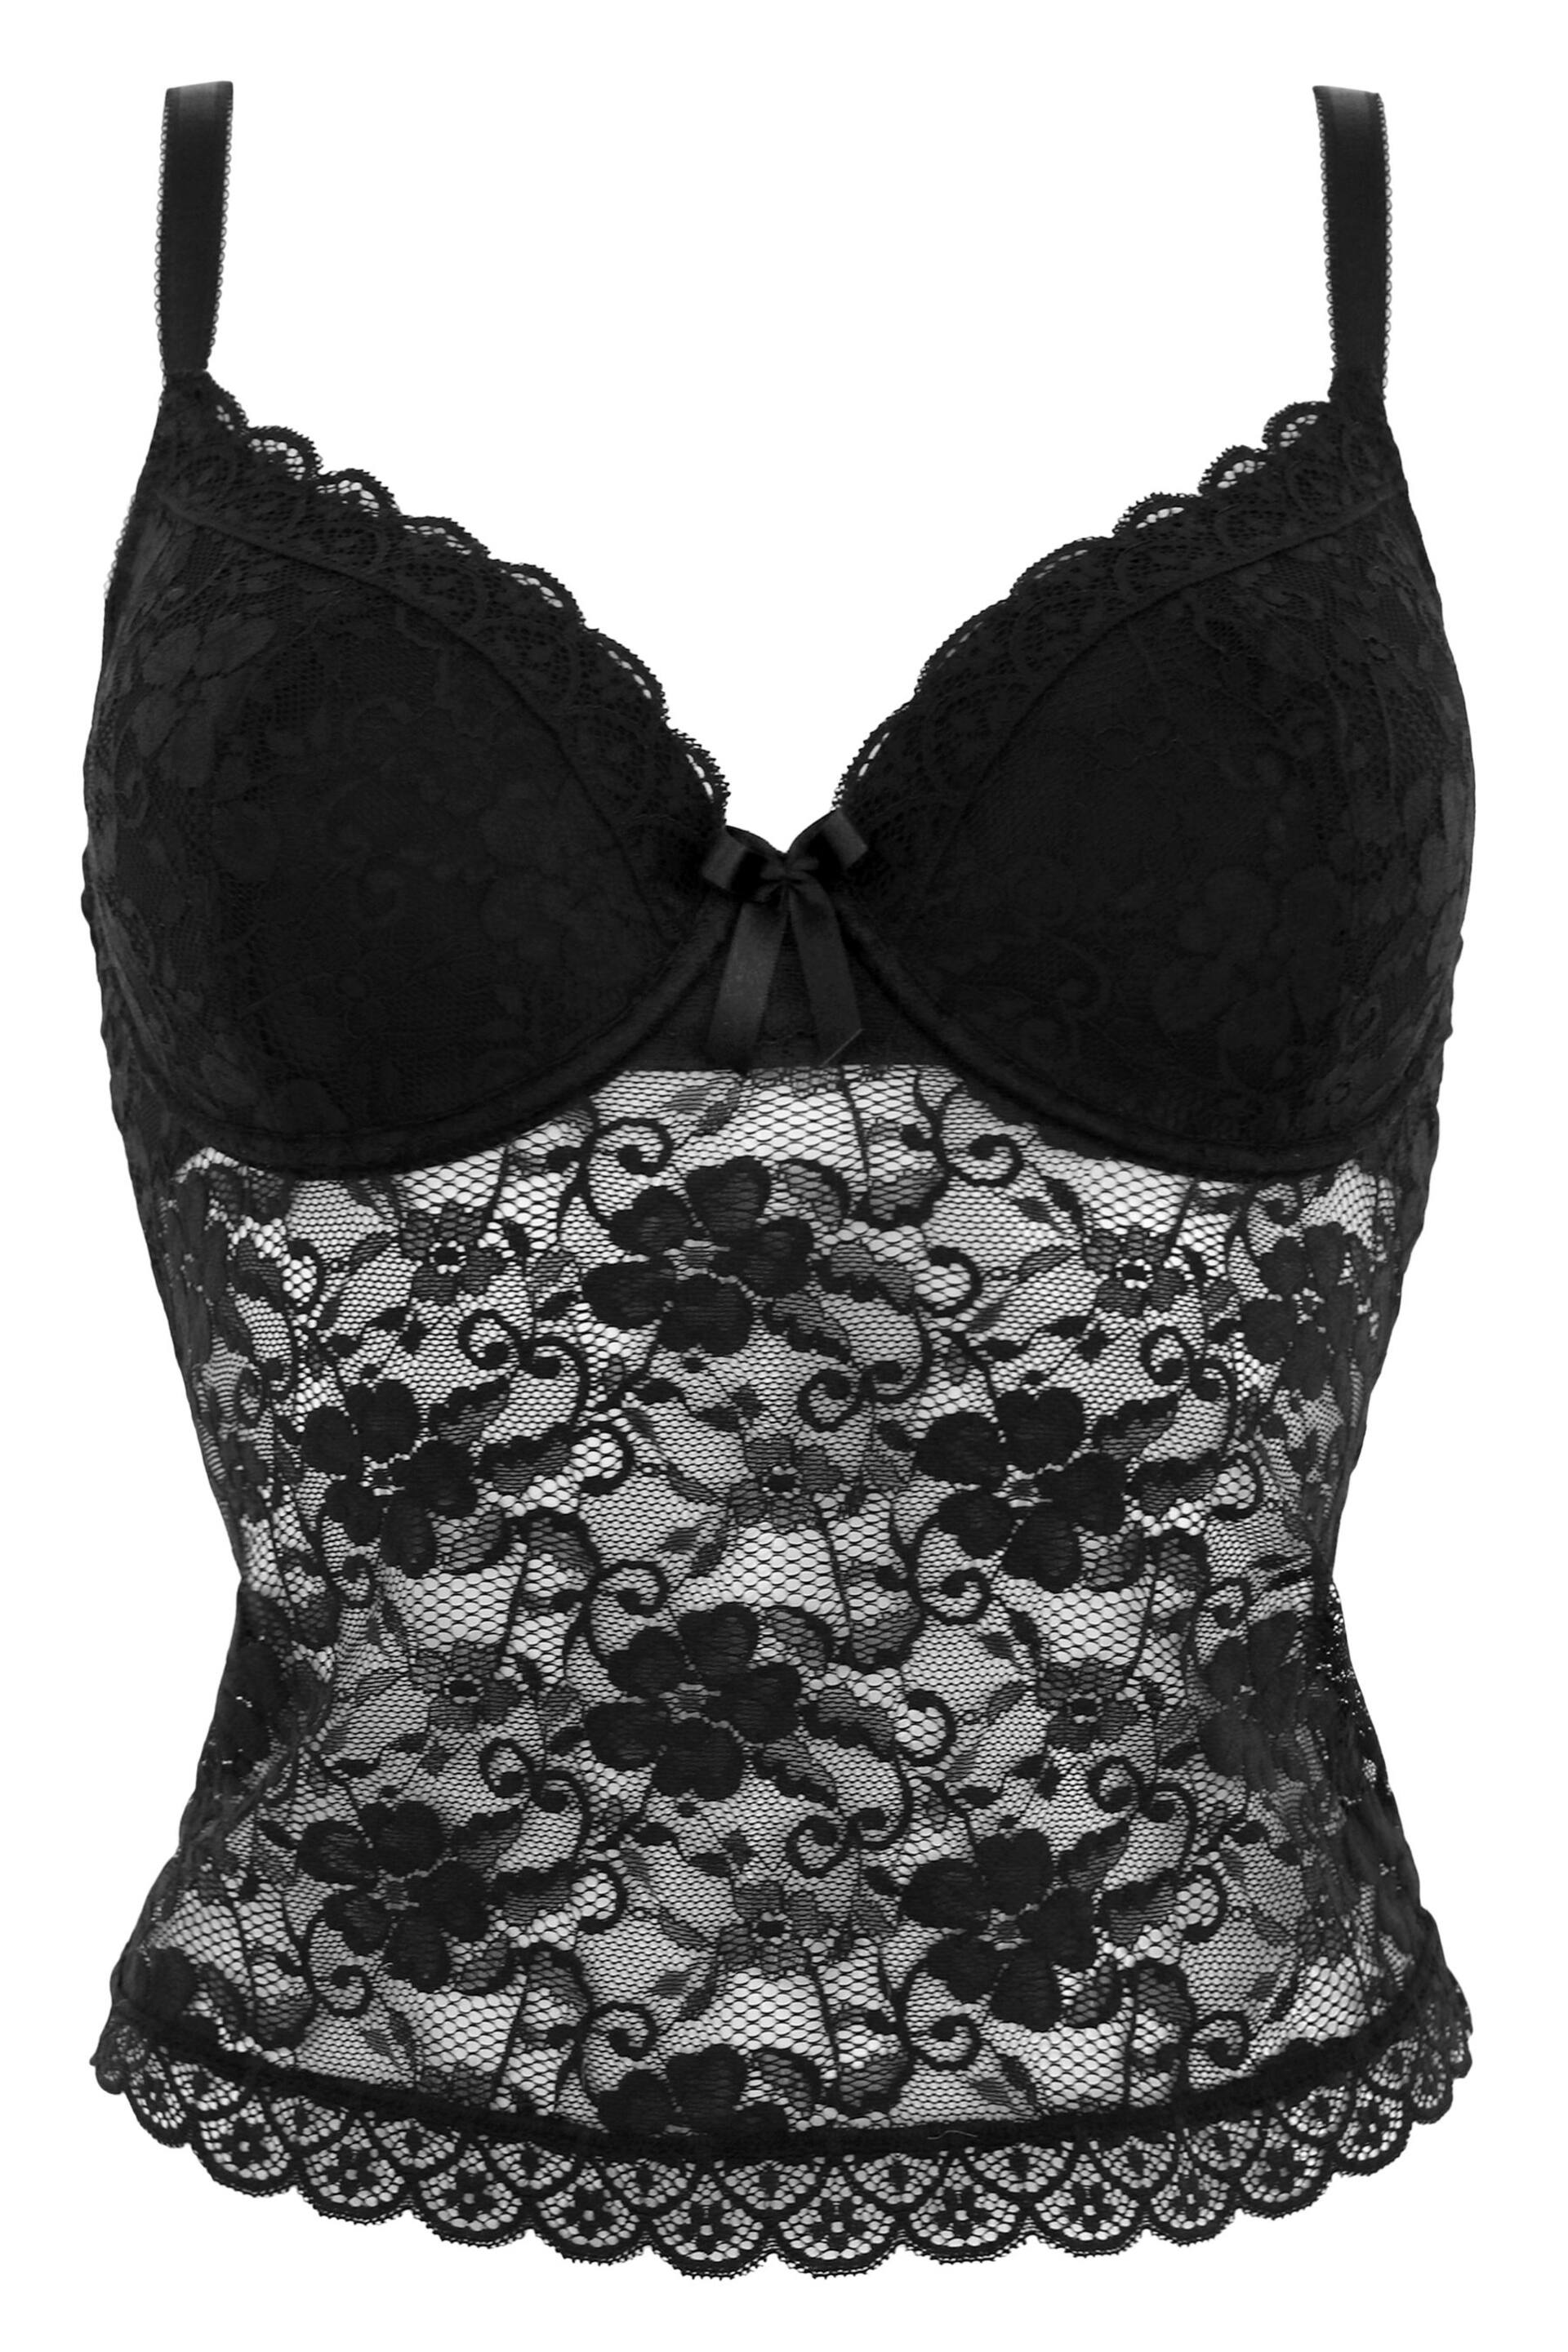 Pour Moi Black Rebel Camisole Top - Image 4 of 5